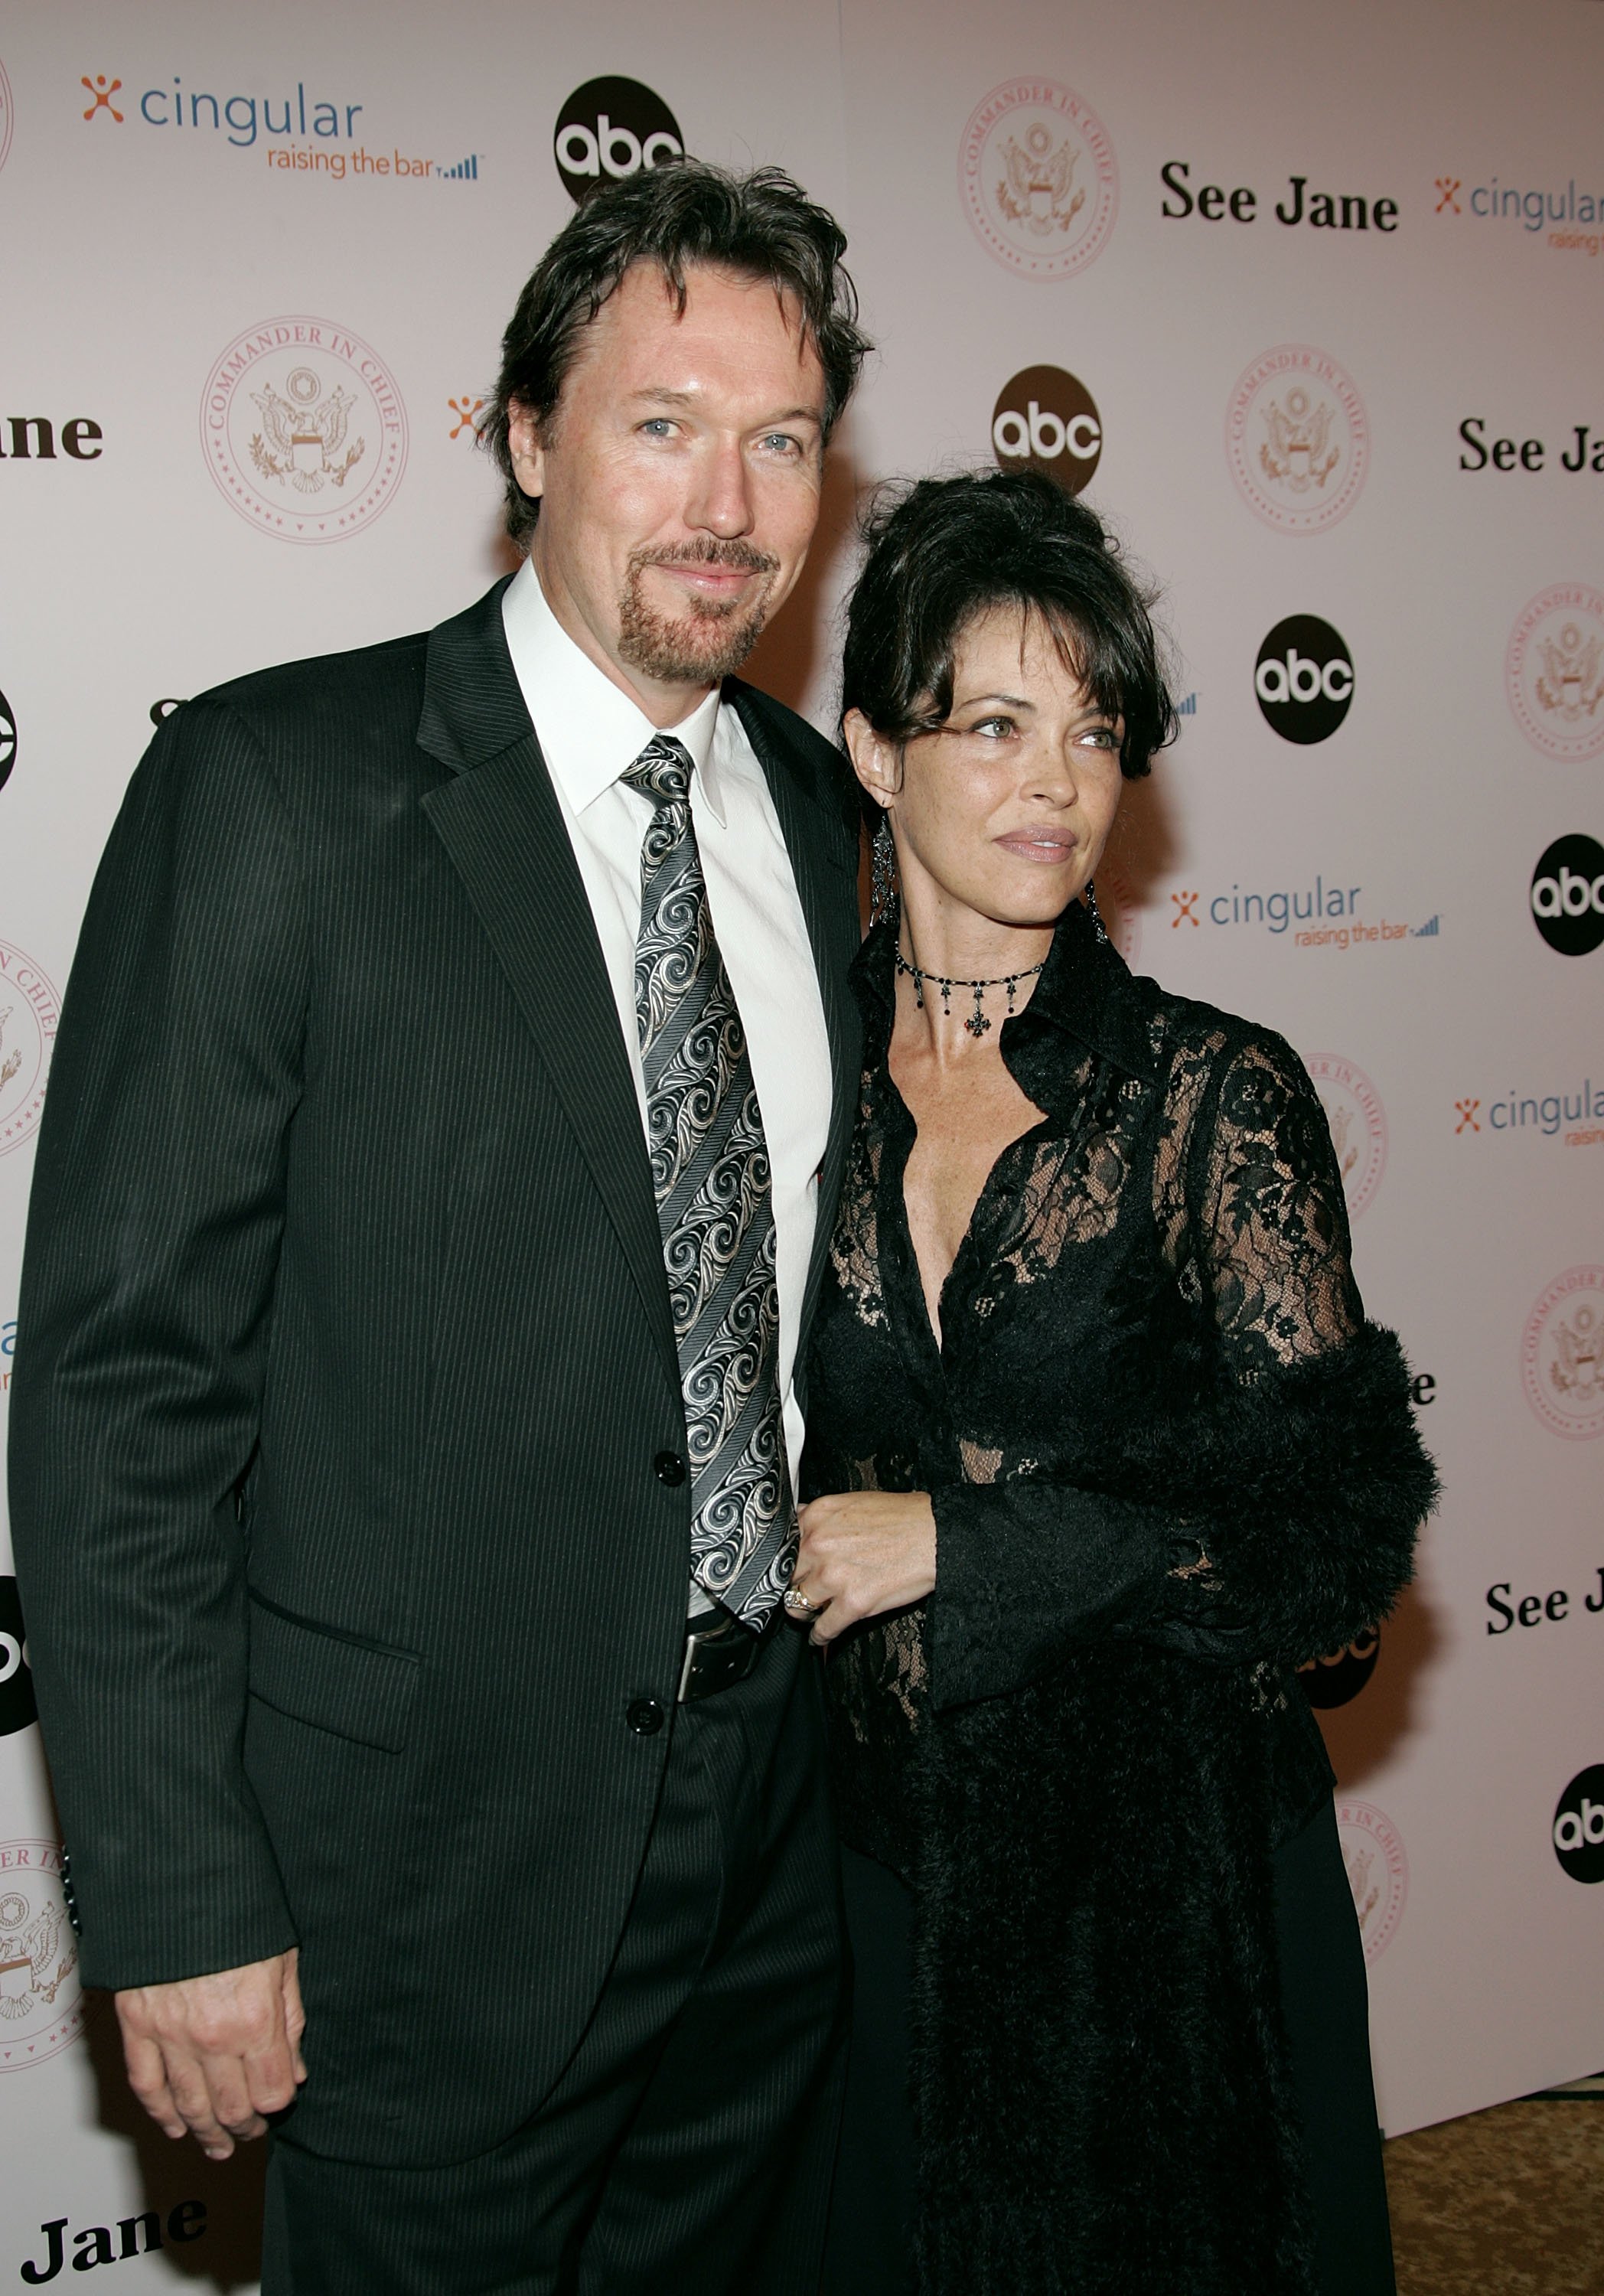 Terry Silver actor Thomas Ian Griffith and wife Mary Page Keller at the Commander in Chief inaugural ball